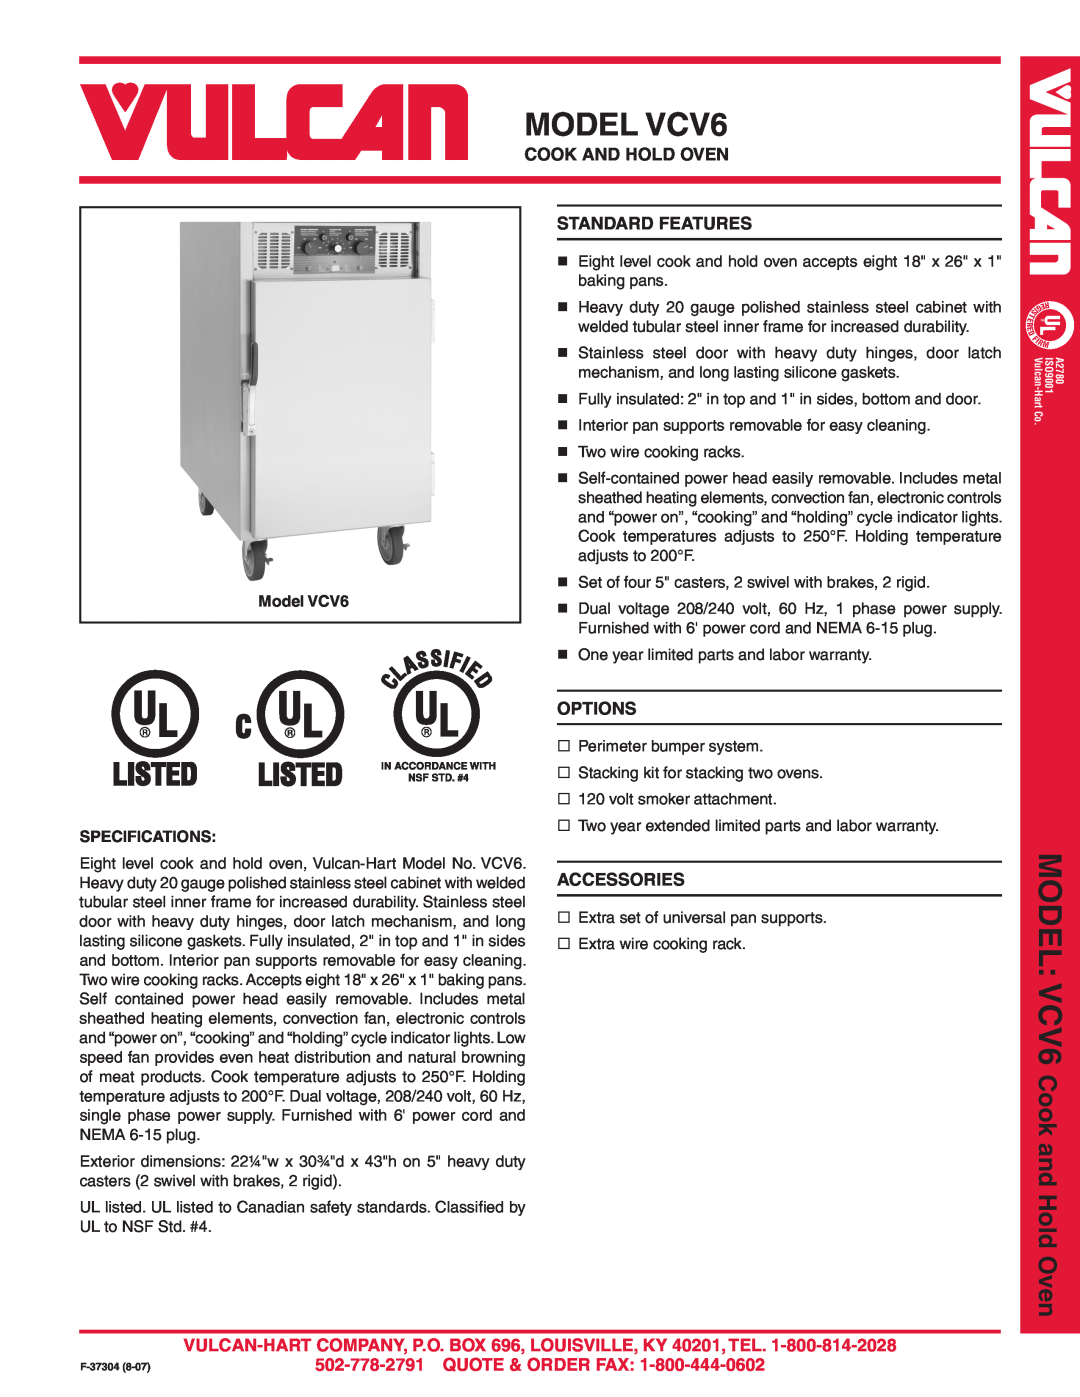 Vulcan-Hart warranty MODEL VCV6, Cook And Hold Oven, Standard Features, Options, Accessories, Quote & Order Fax 